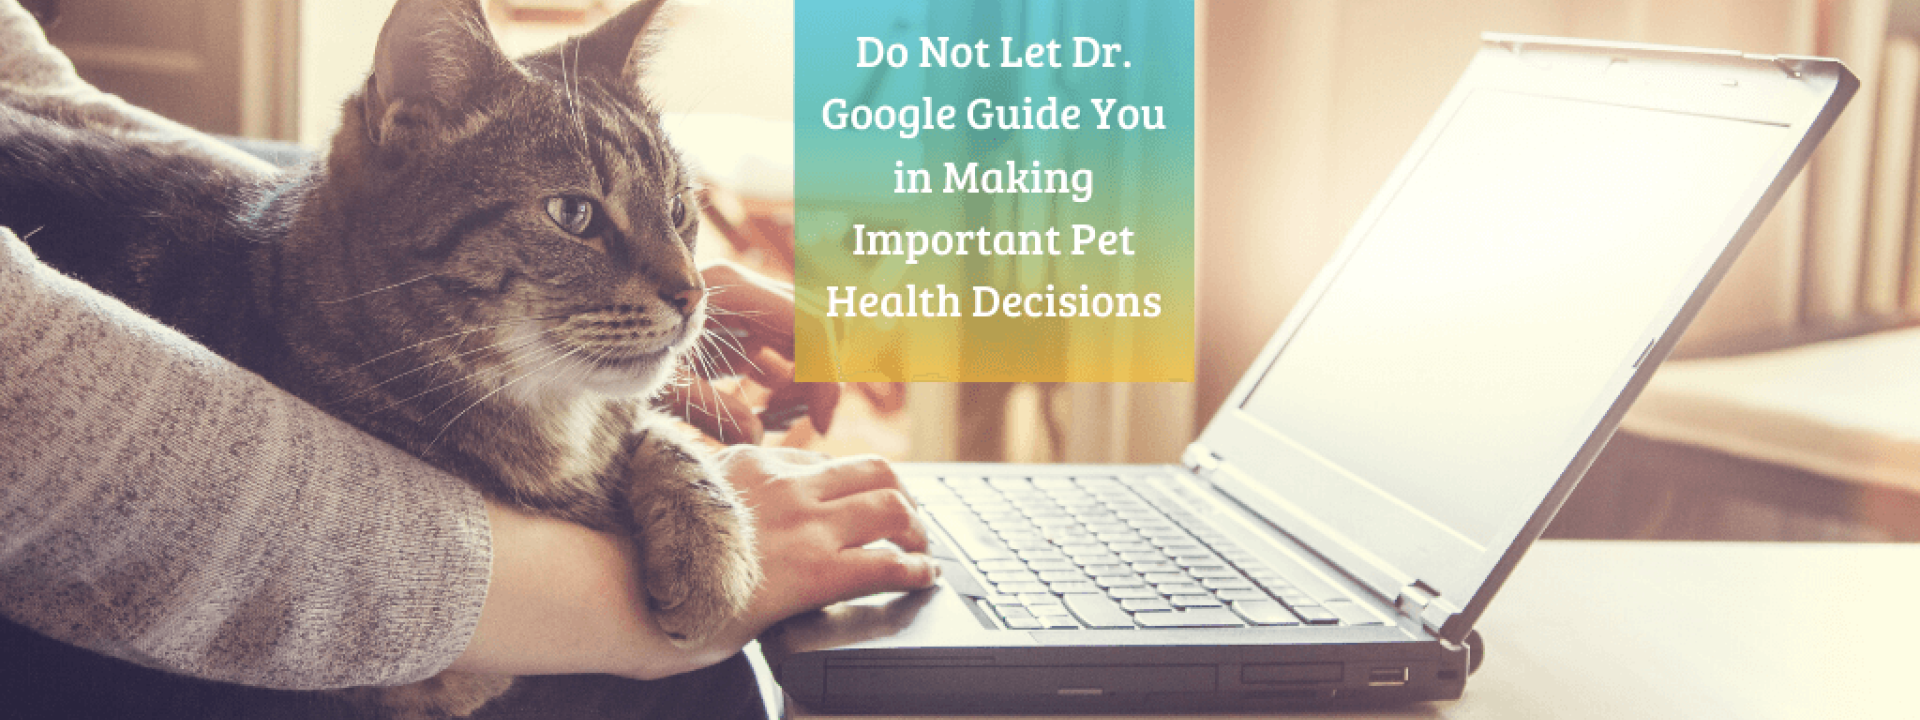 Don't use Google for important pet health questions